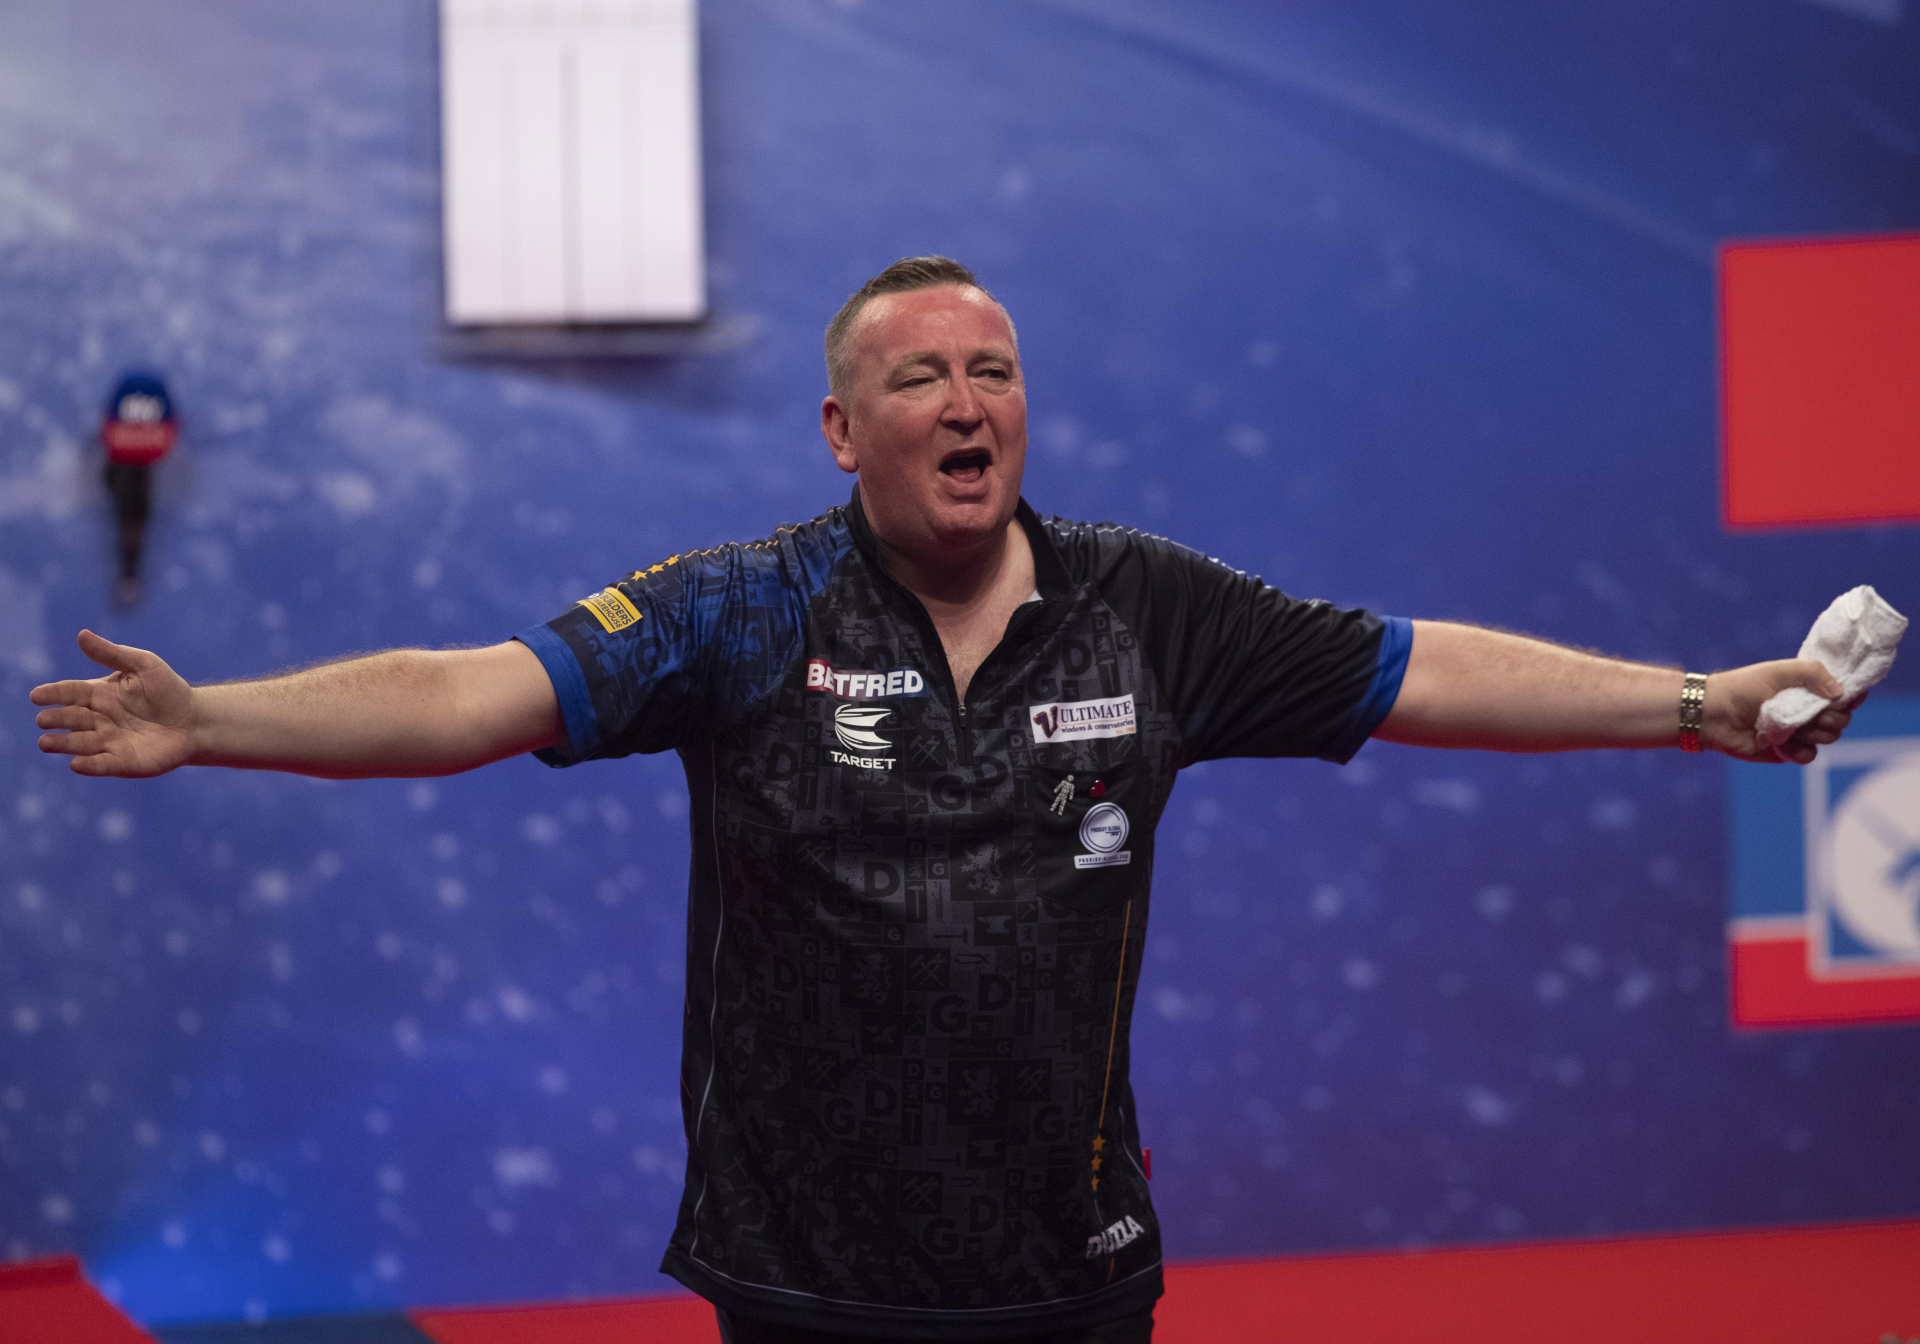 Who are the Ally Pally debutants? | PDC